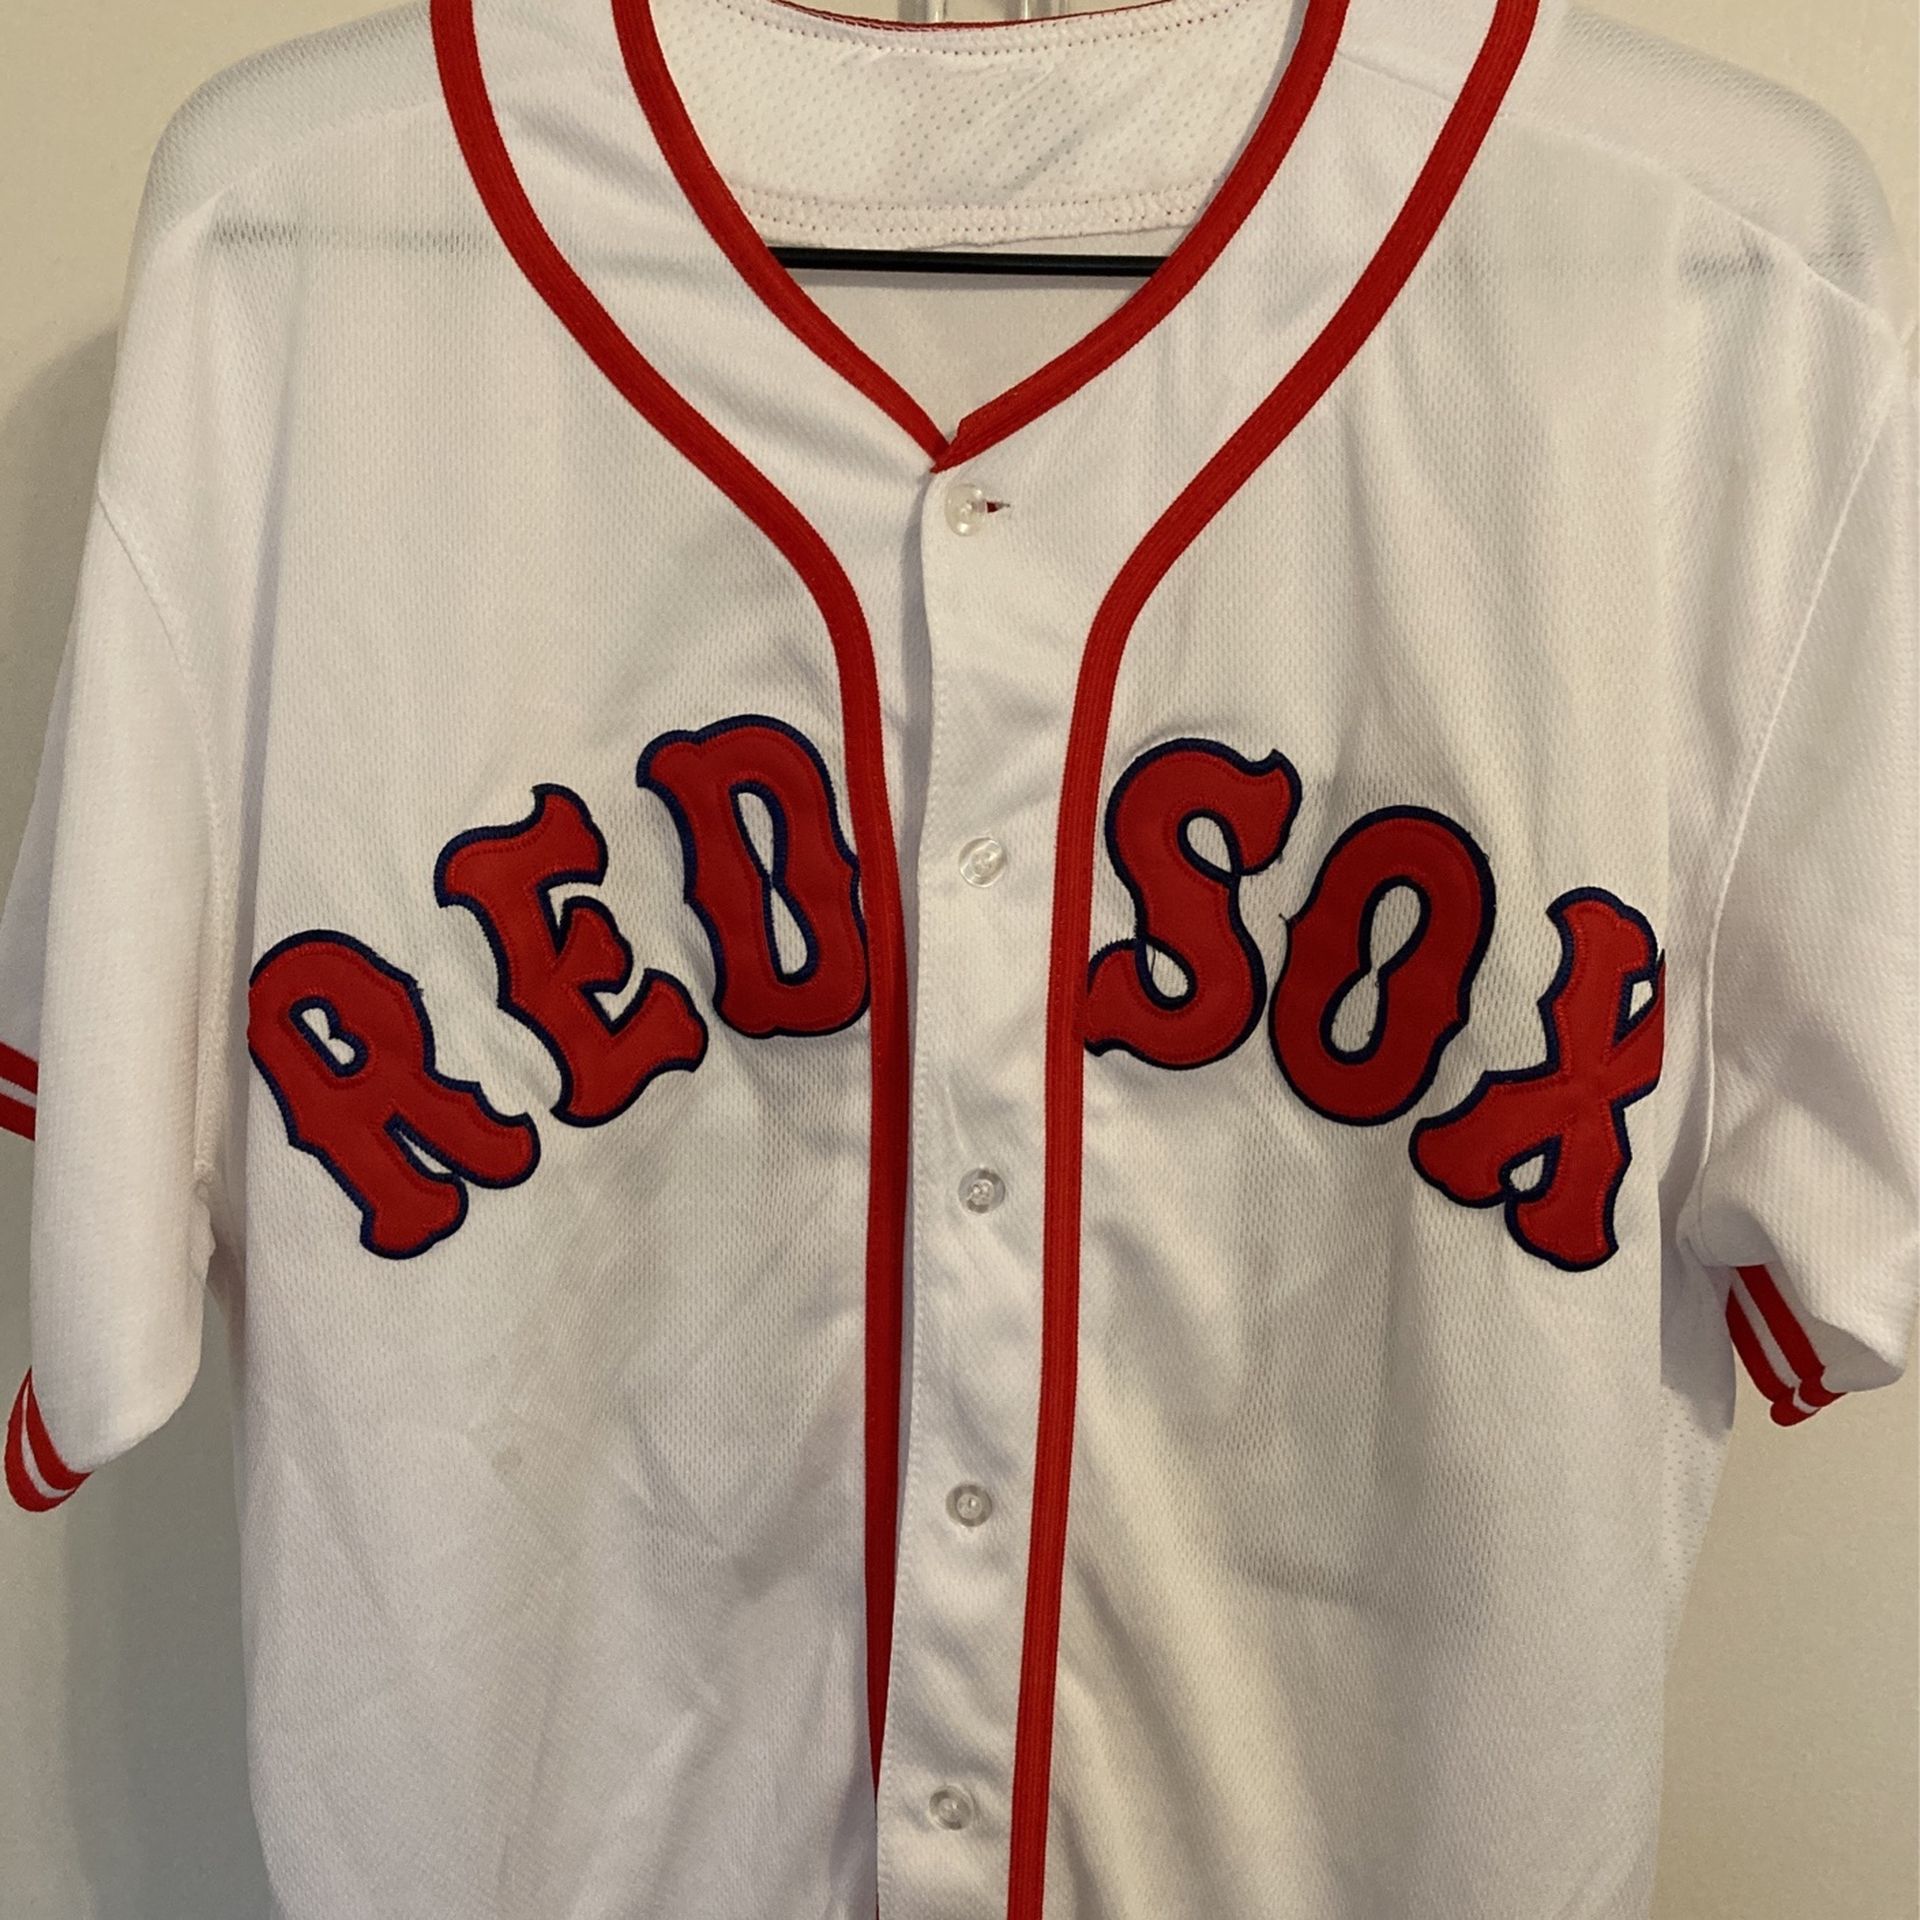 Boston Red Sox 40 Size MLB Jerseys for sale